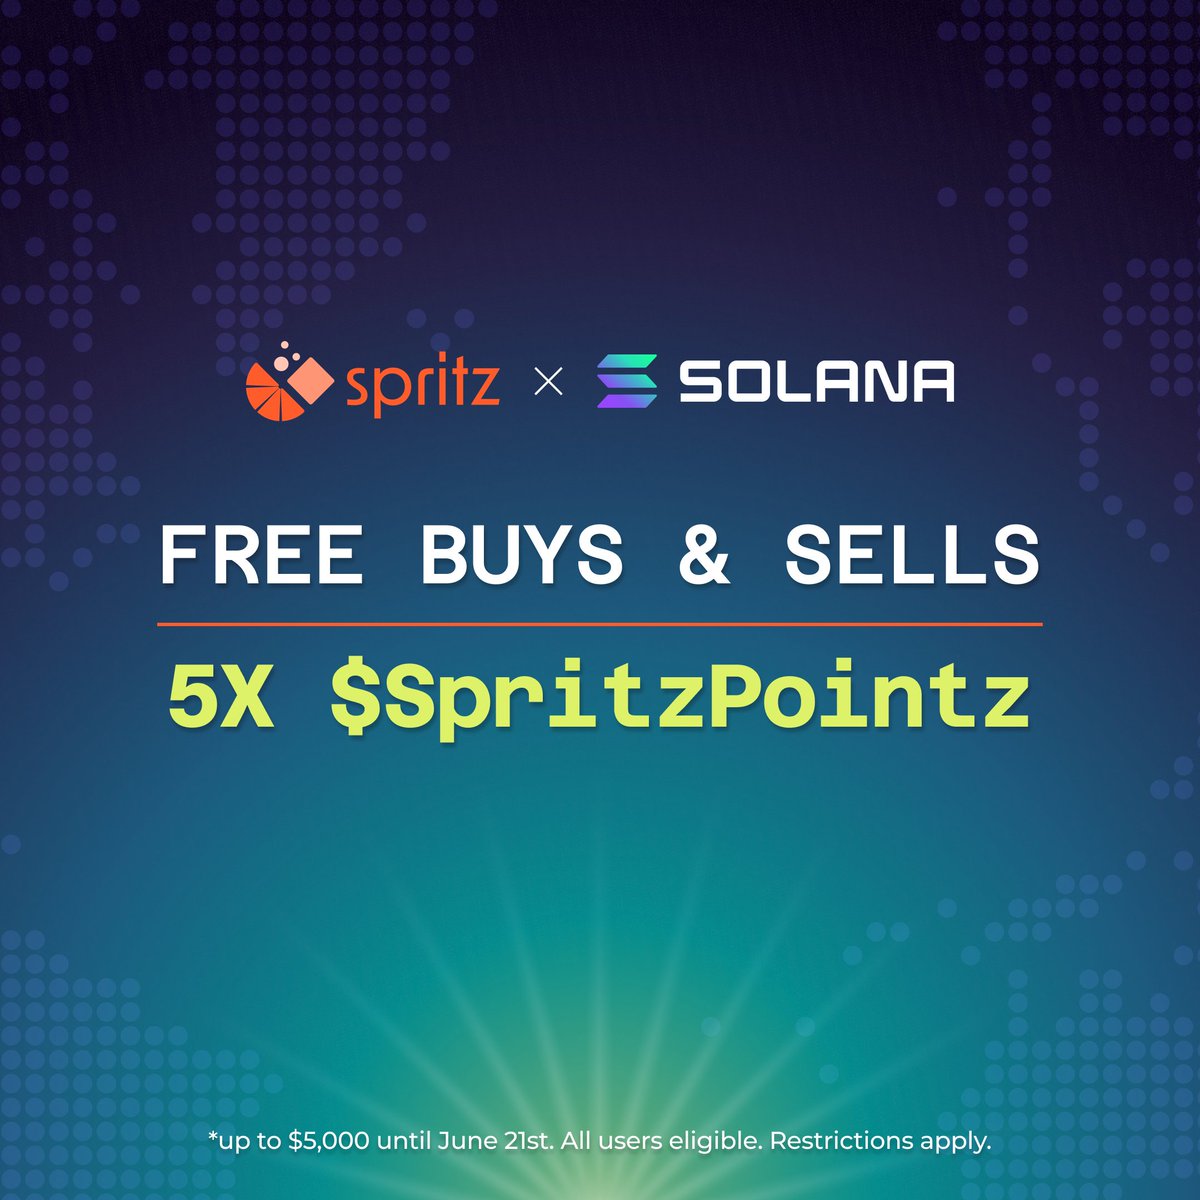 FREE Buys & Sells on #Solana… 🔥 AND 5x $SpritzPointz for every #Solana txn?! 🤯 Yep. Until June 21st.* 🚀 spritz.finance/SolanaPromoX *Restrictions apply, ofc. 😉